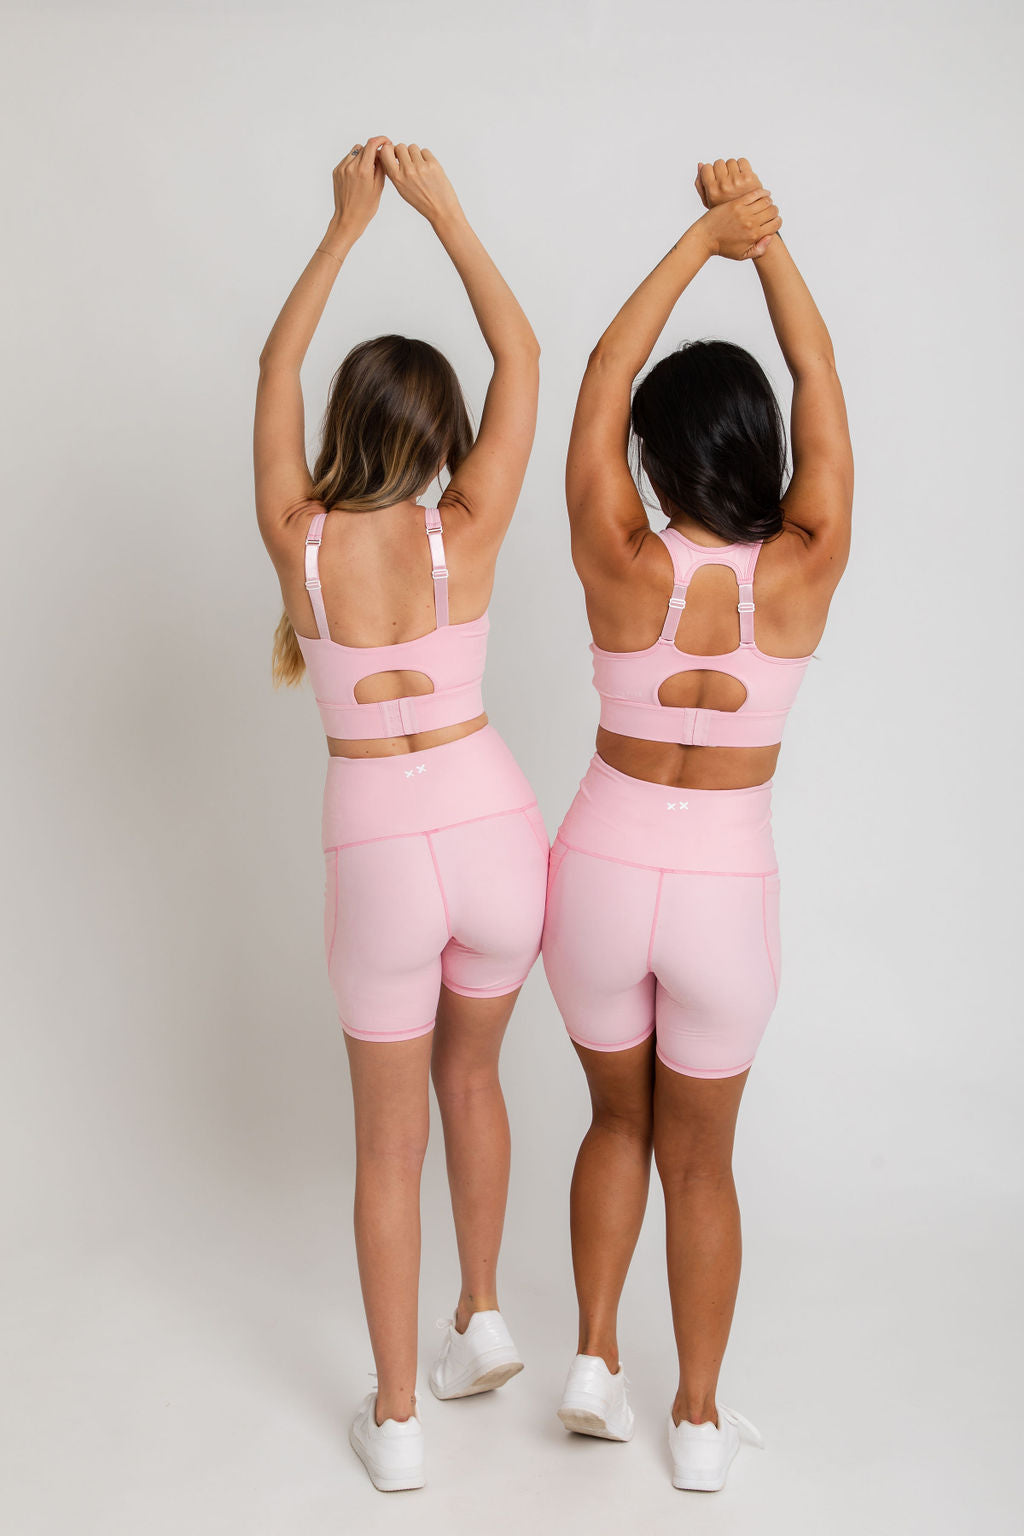 New color ABA Sports Bra now in Baby Pink.